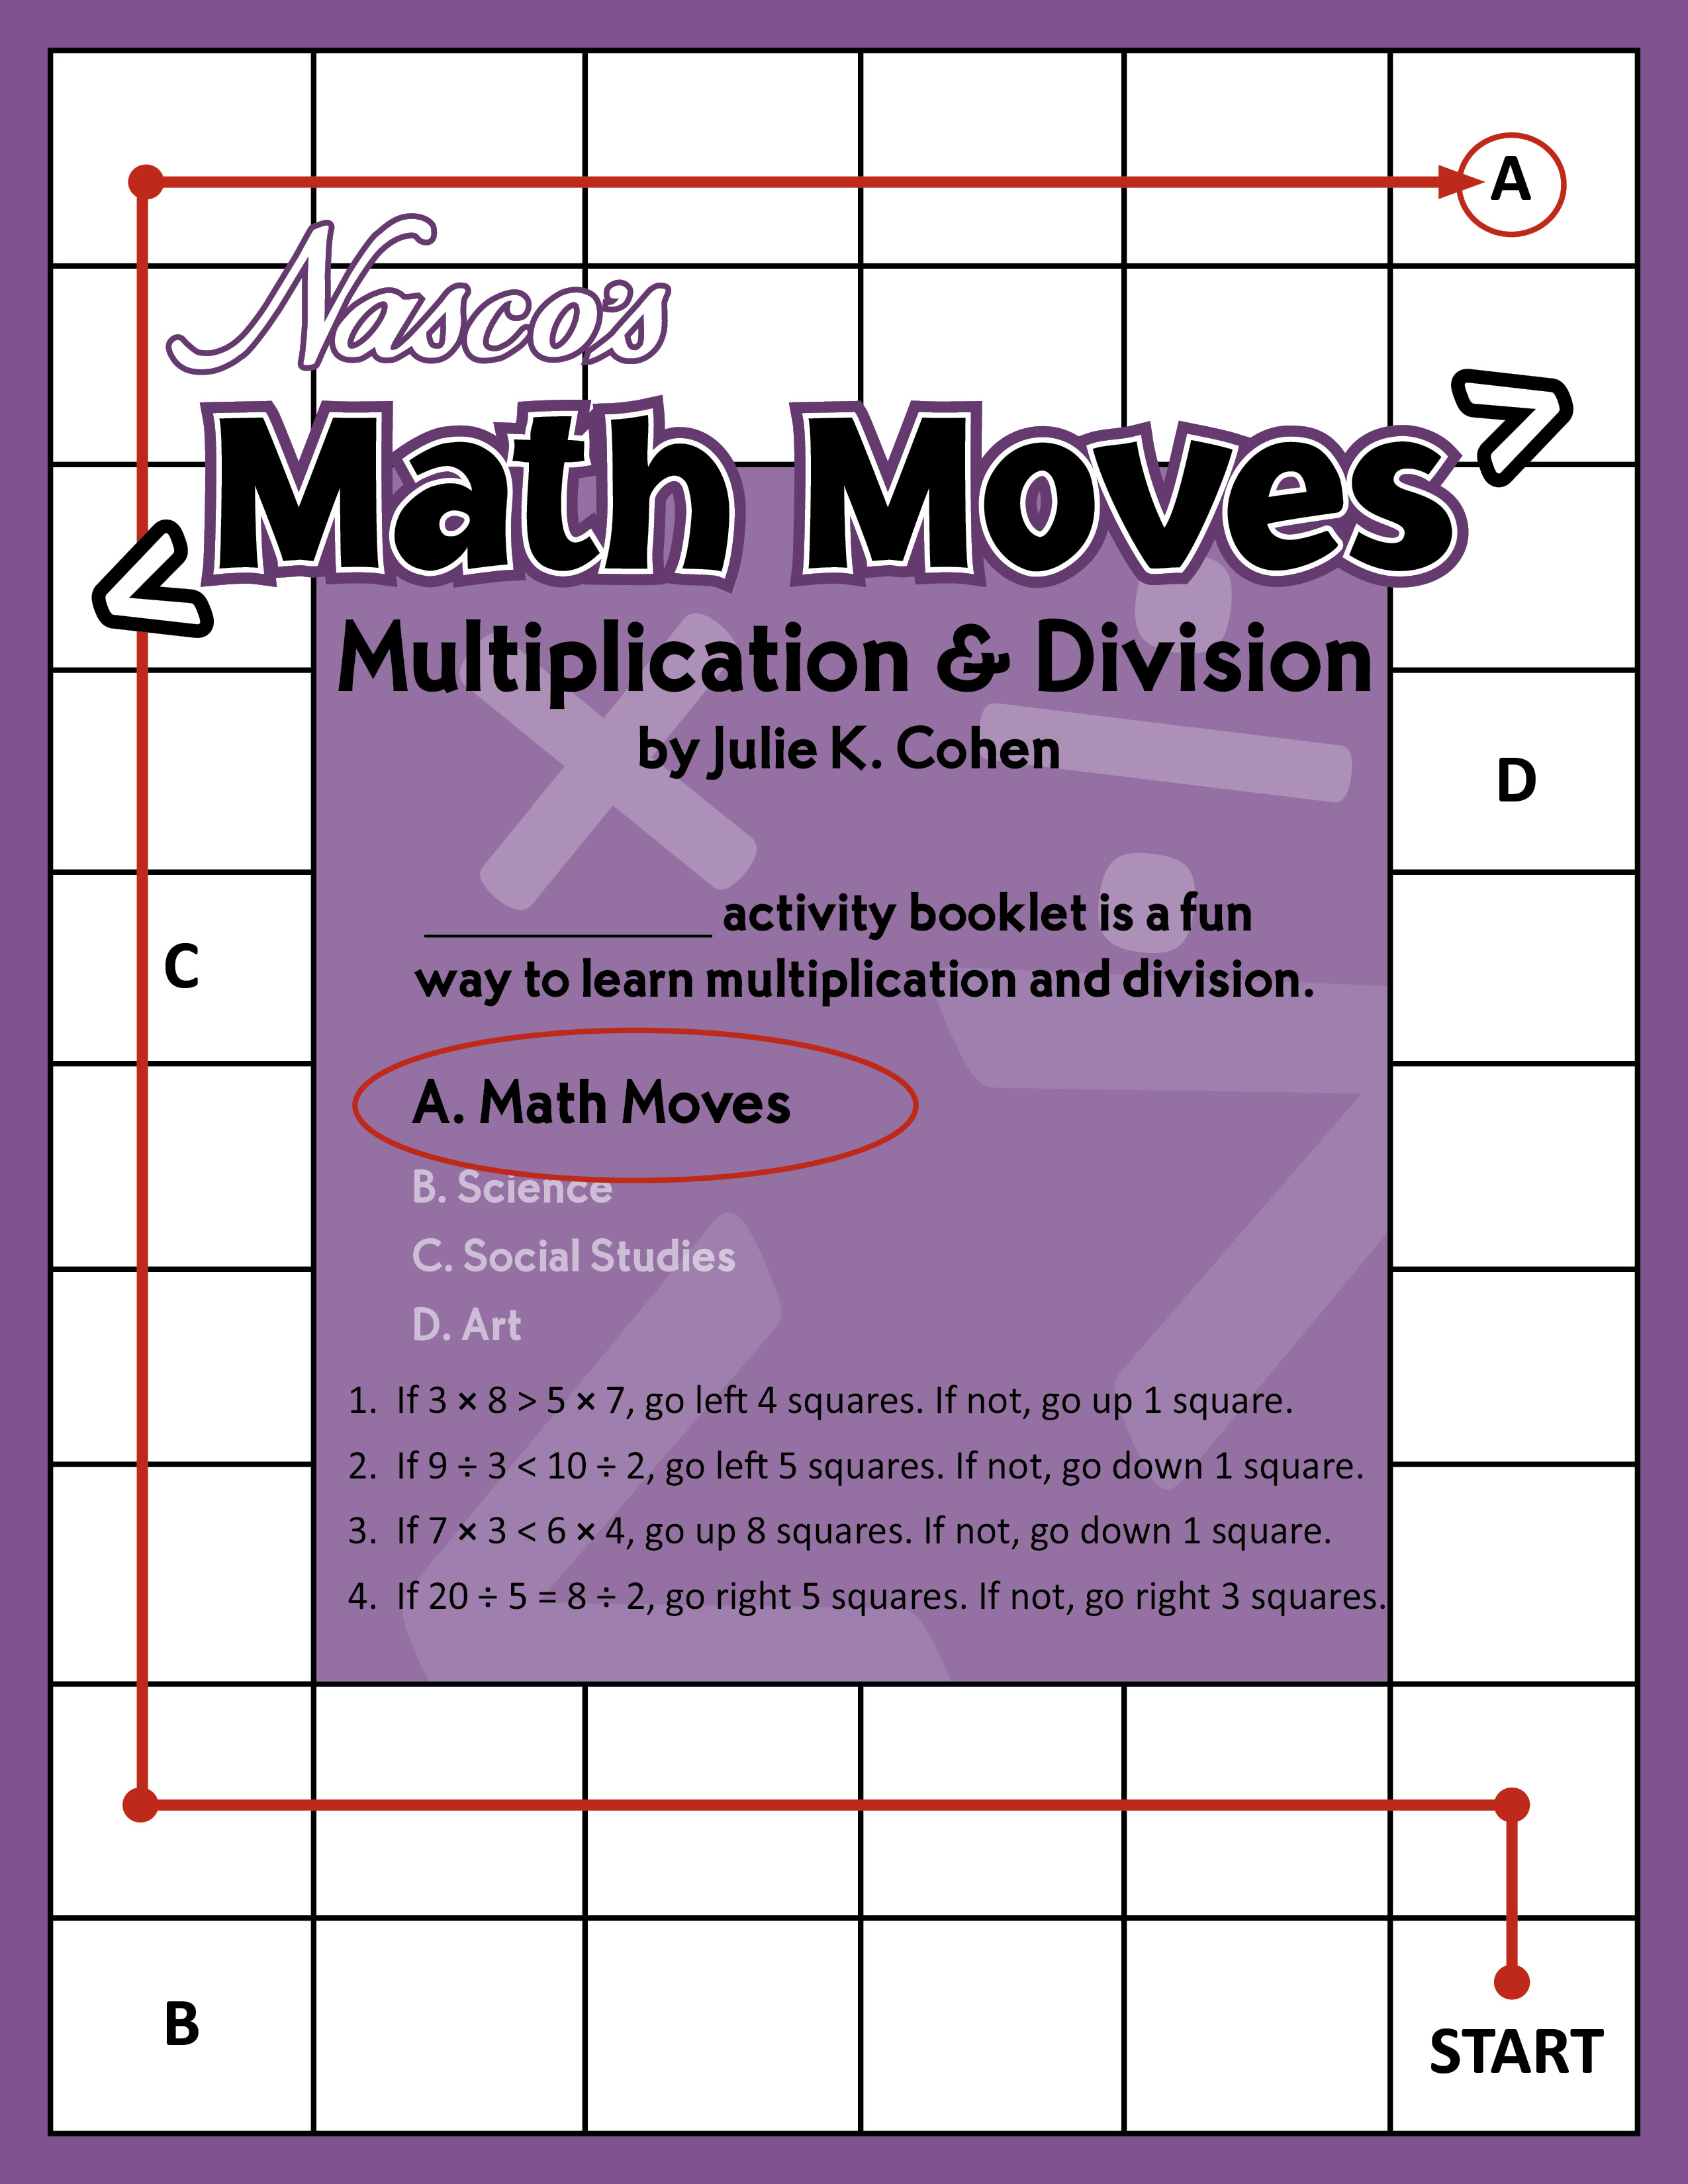 math puzzle book multiplication and division ></a>


<a href=